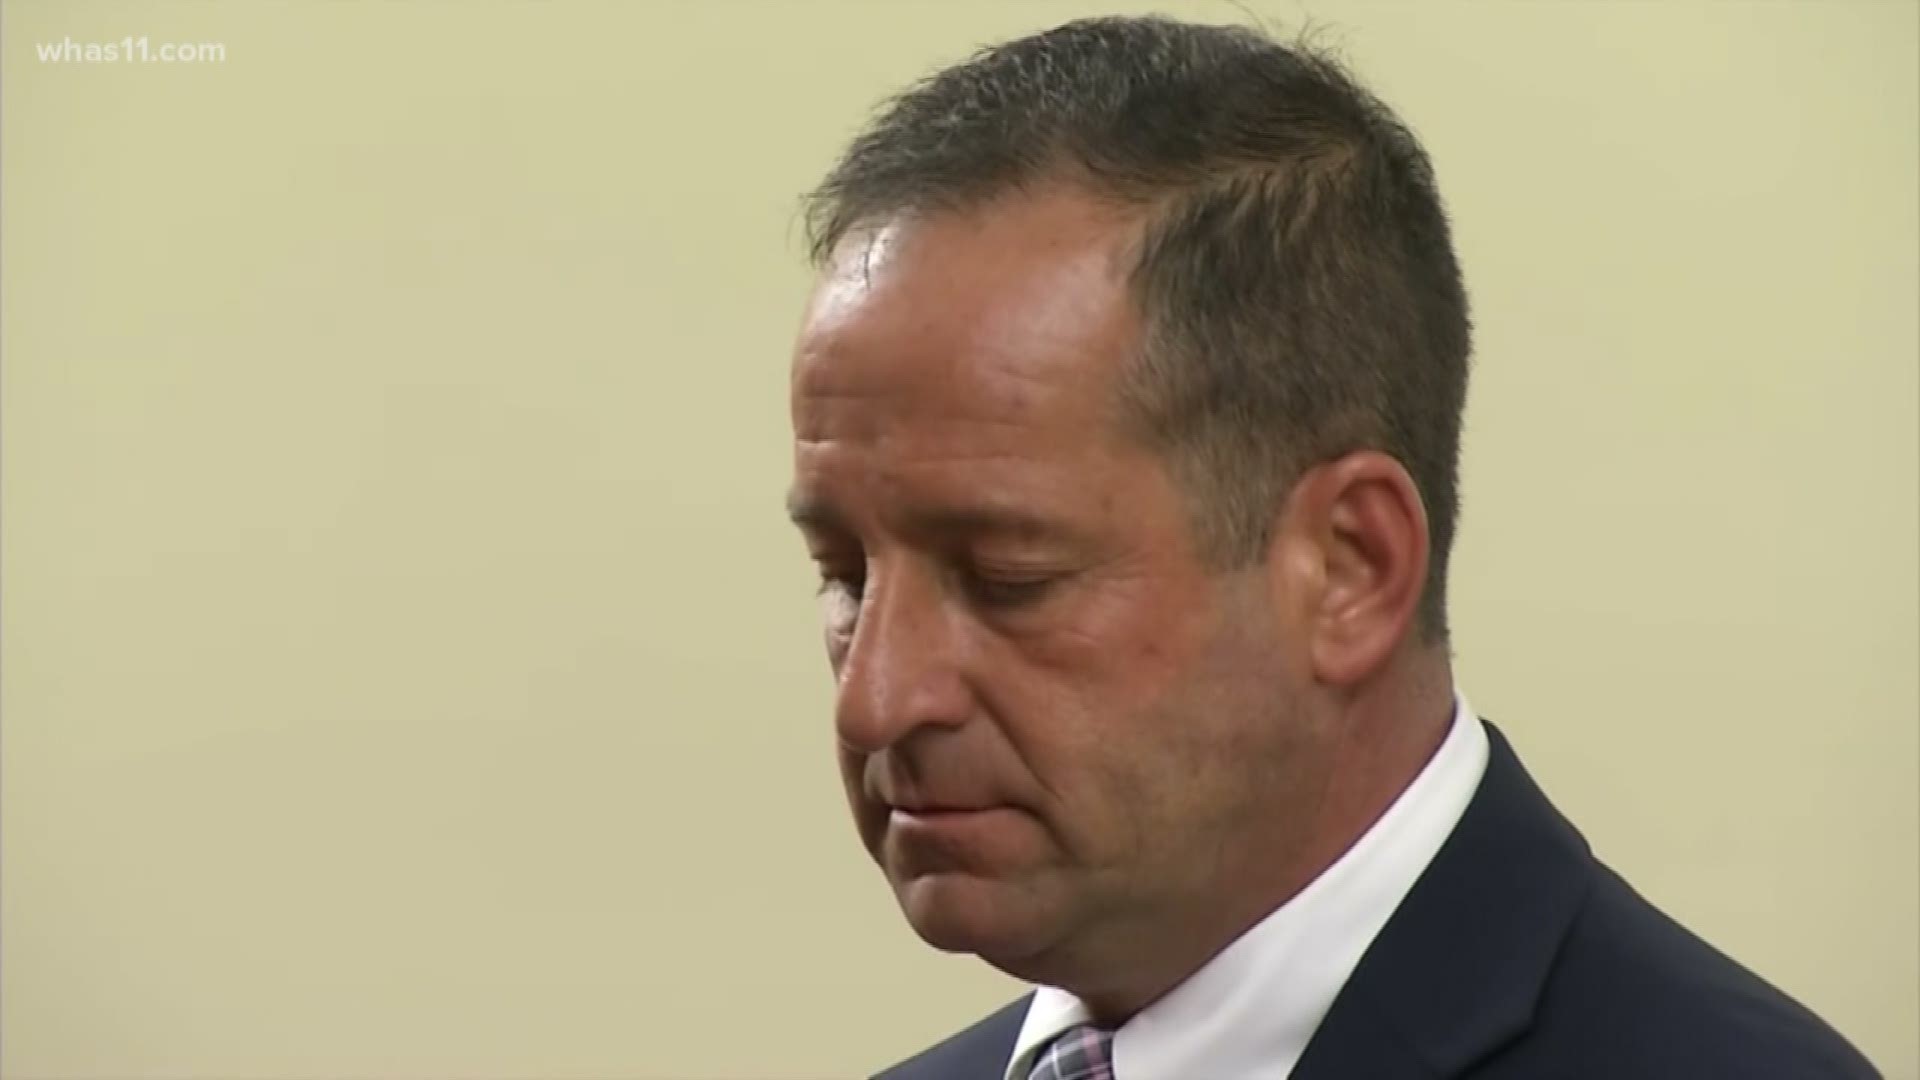 The FOCUS team's John Charlton, has been investigating the allegations and was in the courtroom as Sheriff Todd Pate was arraigned today.